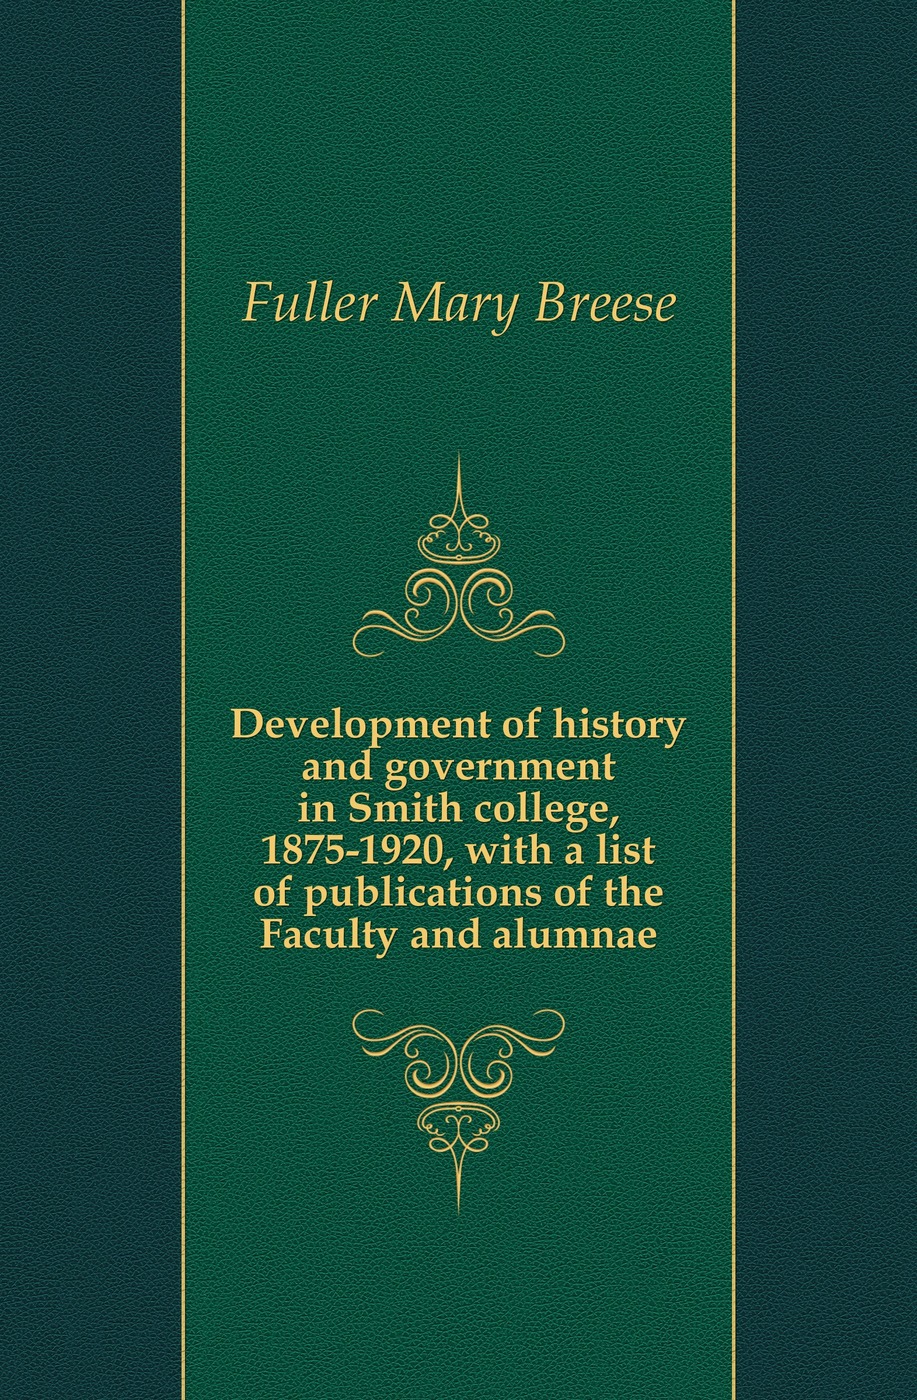 Development of history and government in Smith college, 1875-1920, with a list of publications of the Faculty and alumnae